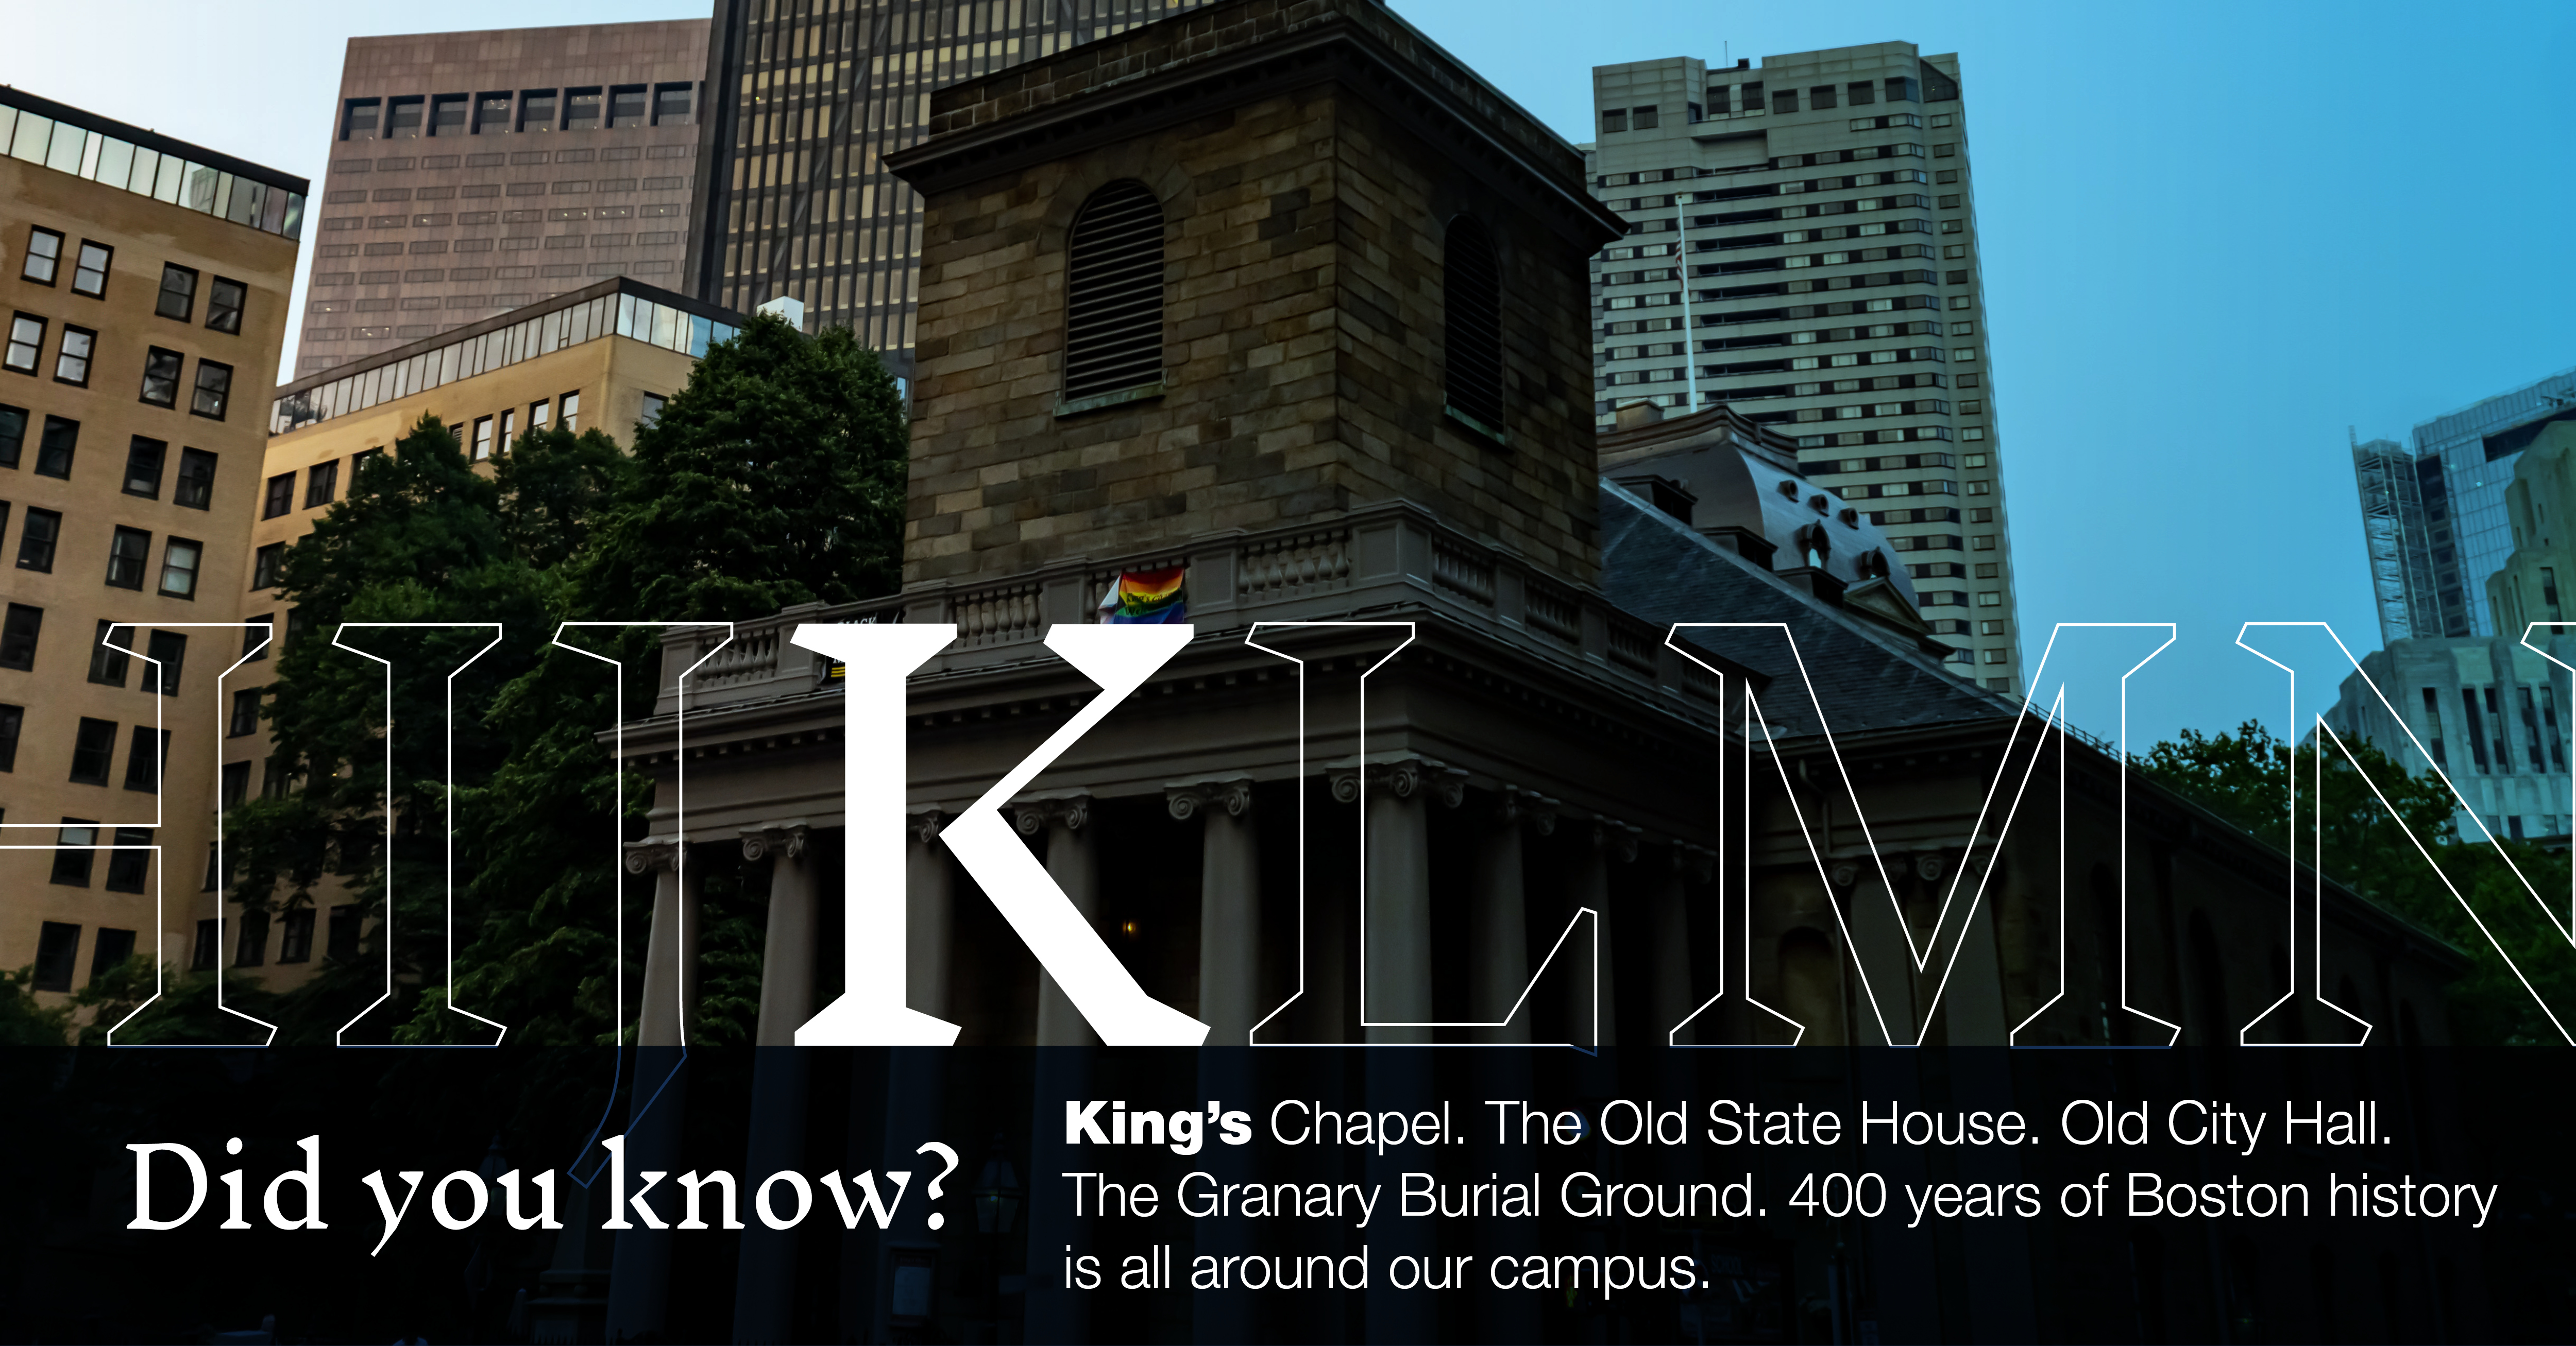 K: [image of Kings Chapel on Tremont St] King's Chapel. The Old State House. The Granary Burial Ground. Did you know 400 years of Boston history is all around our campus?